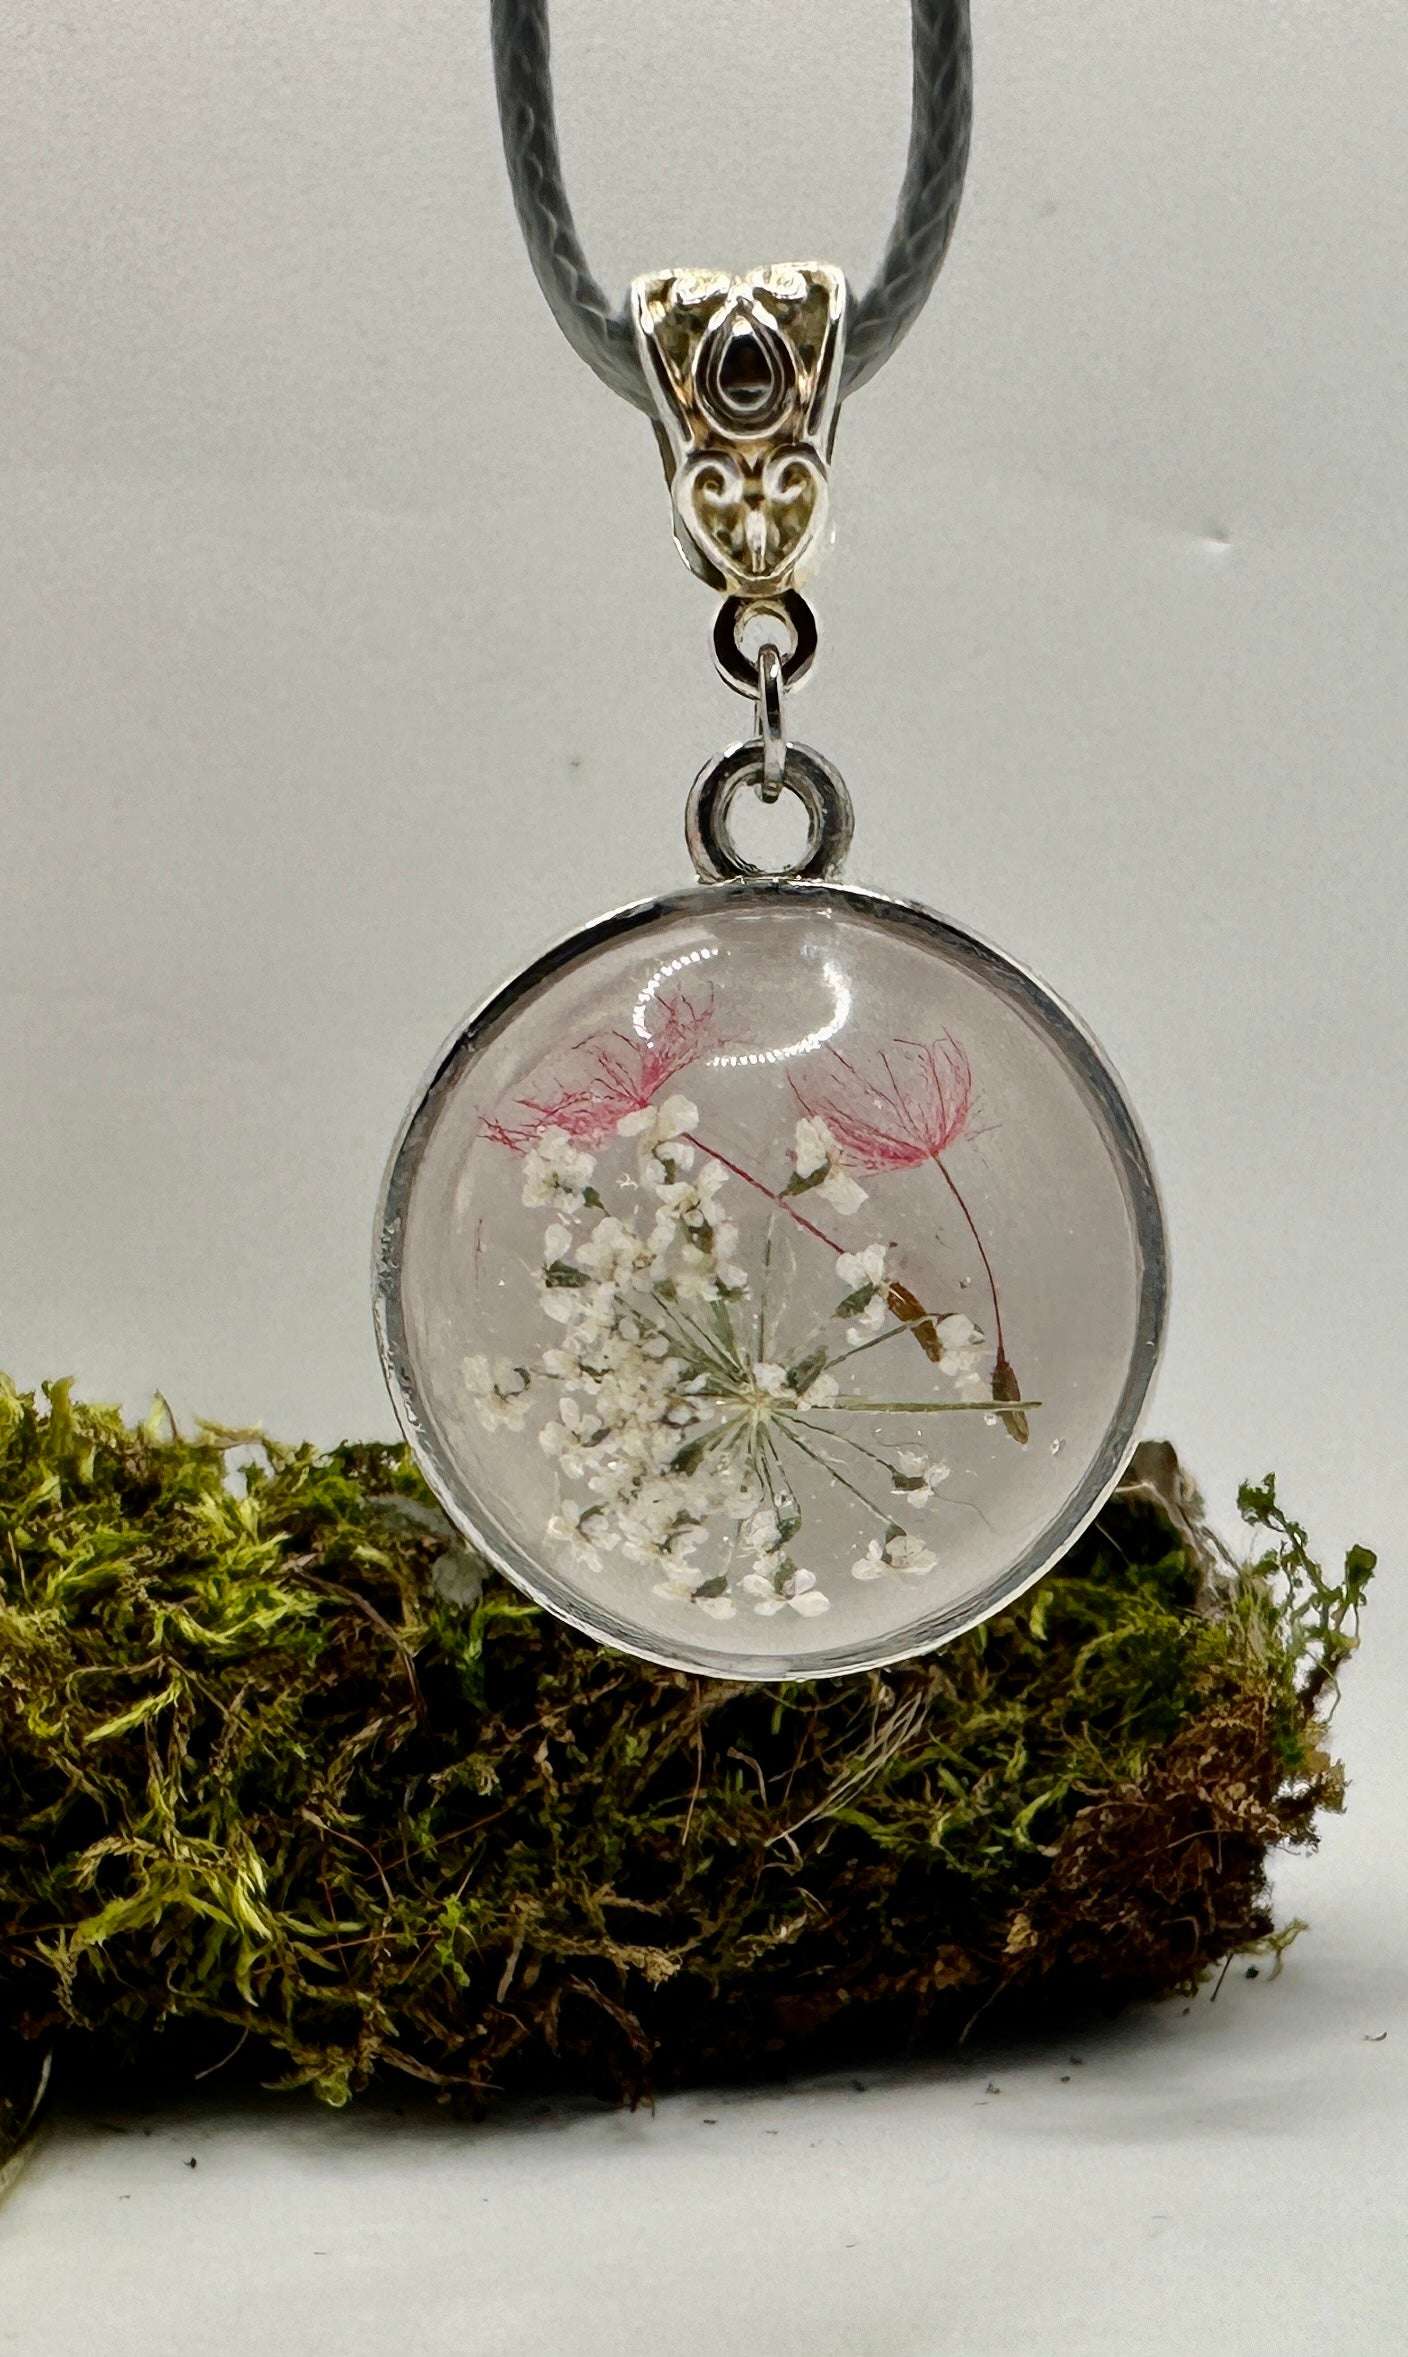 Fairy Wishes & Lace  - Handmade with real Dandelion Seeds